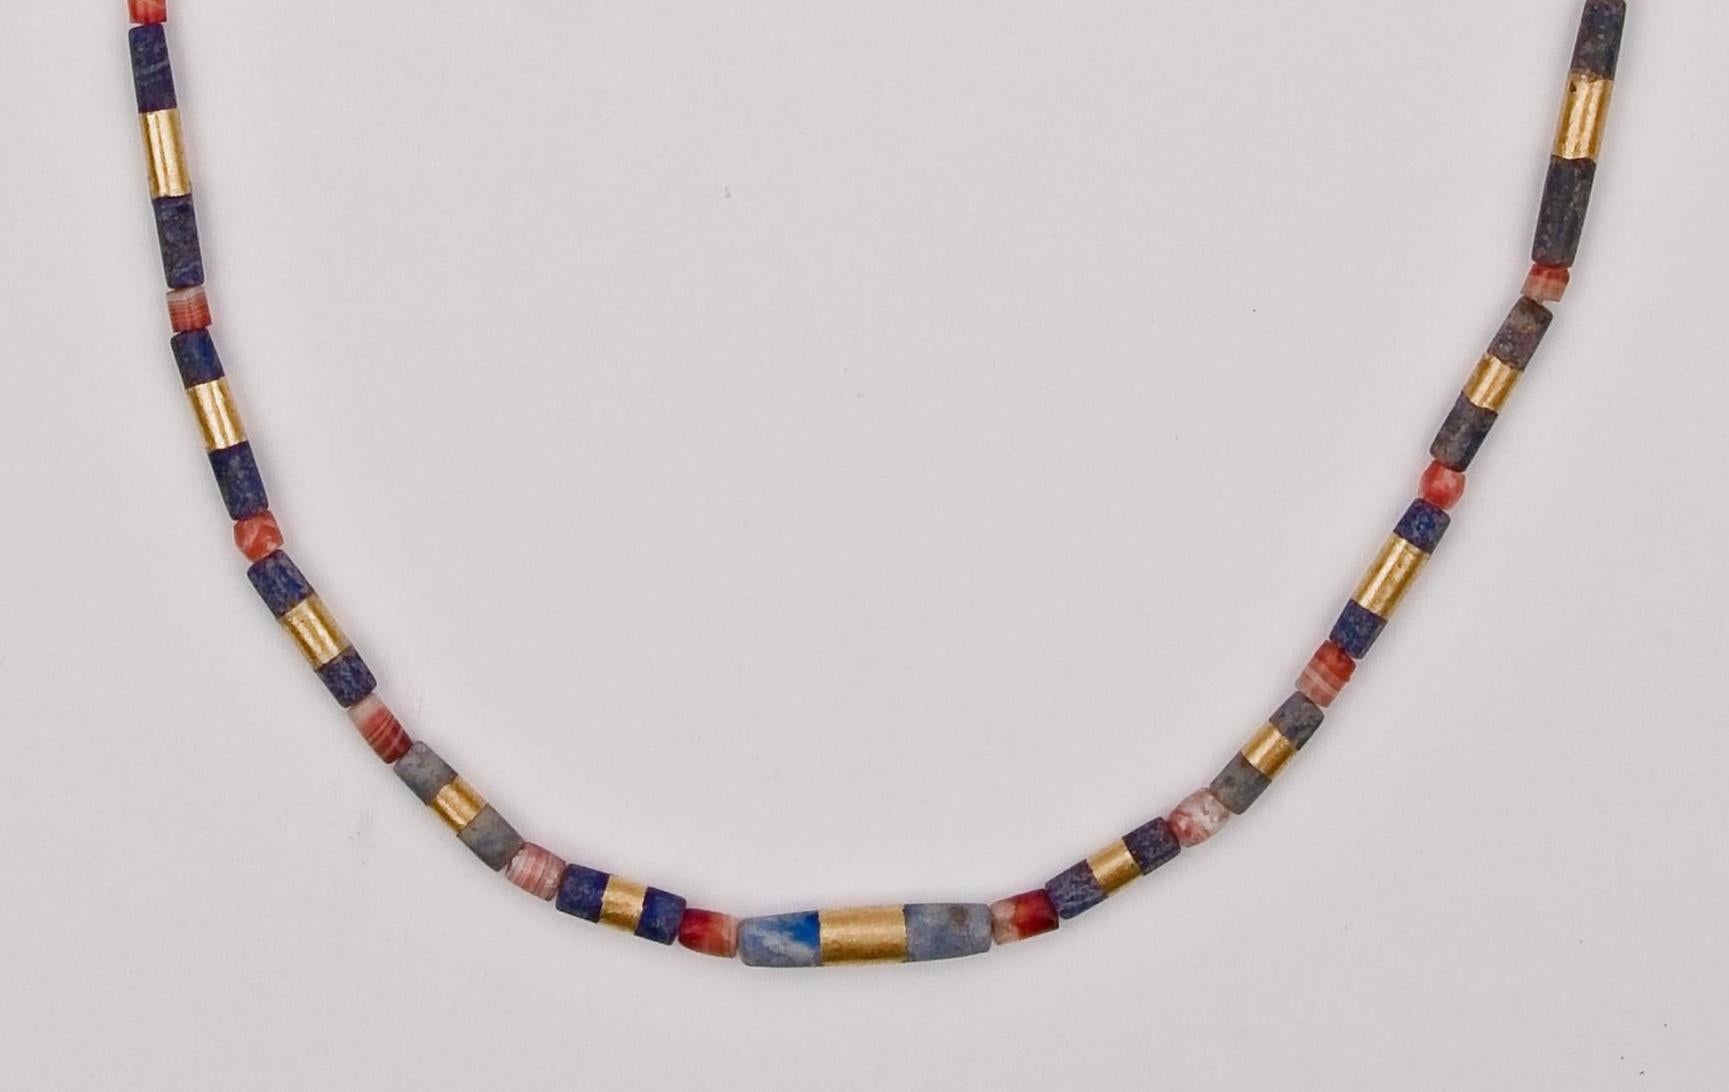 Twenty-six lapis lazuli cylindrical shaped beads, each with a band of 22k gold encircling it at the center, alternating with twenty-seven barrel-shaped carnelian beads. The lapis lazuli beads graduate in size towards the back of the necklace. The